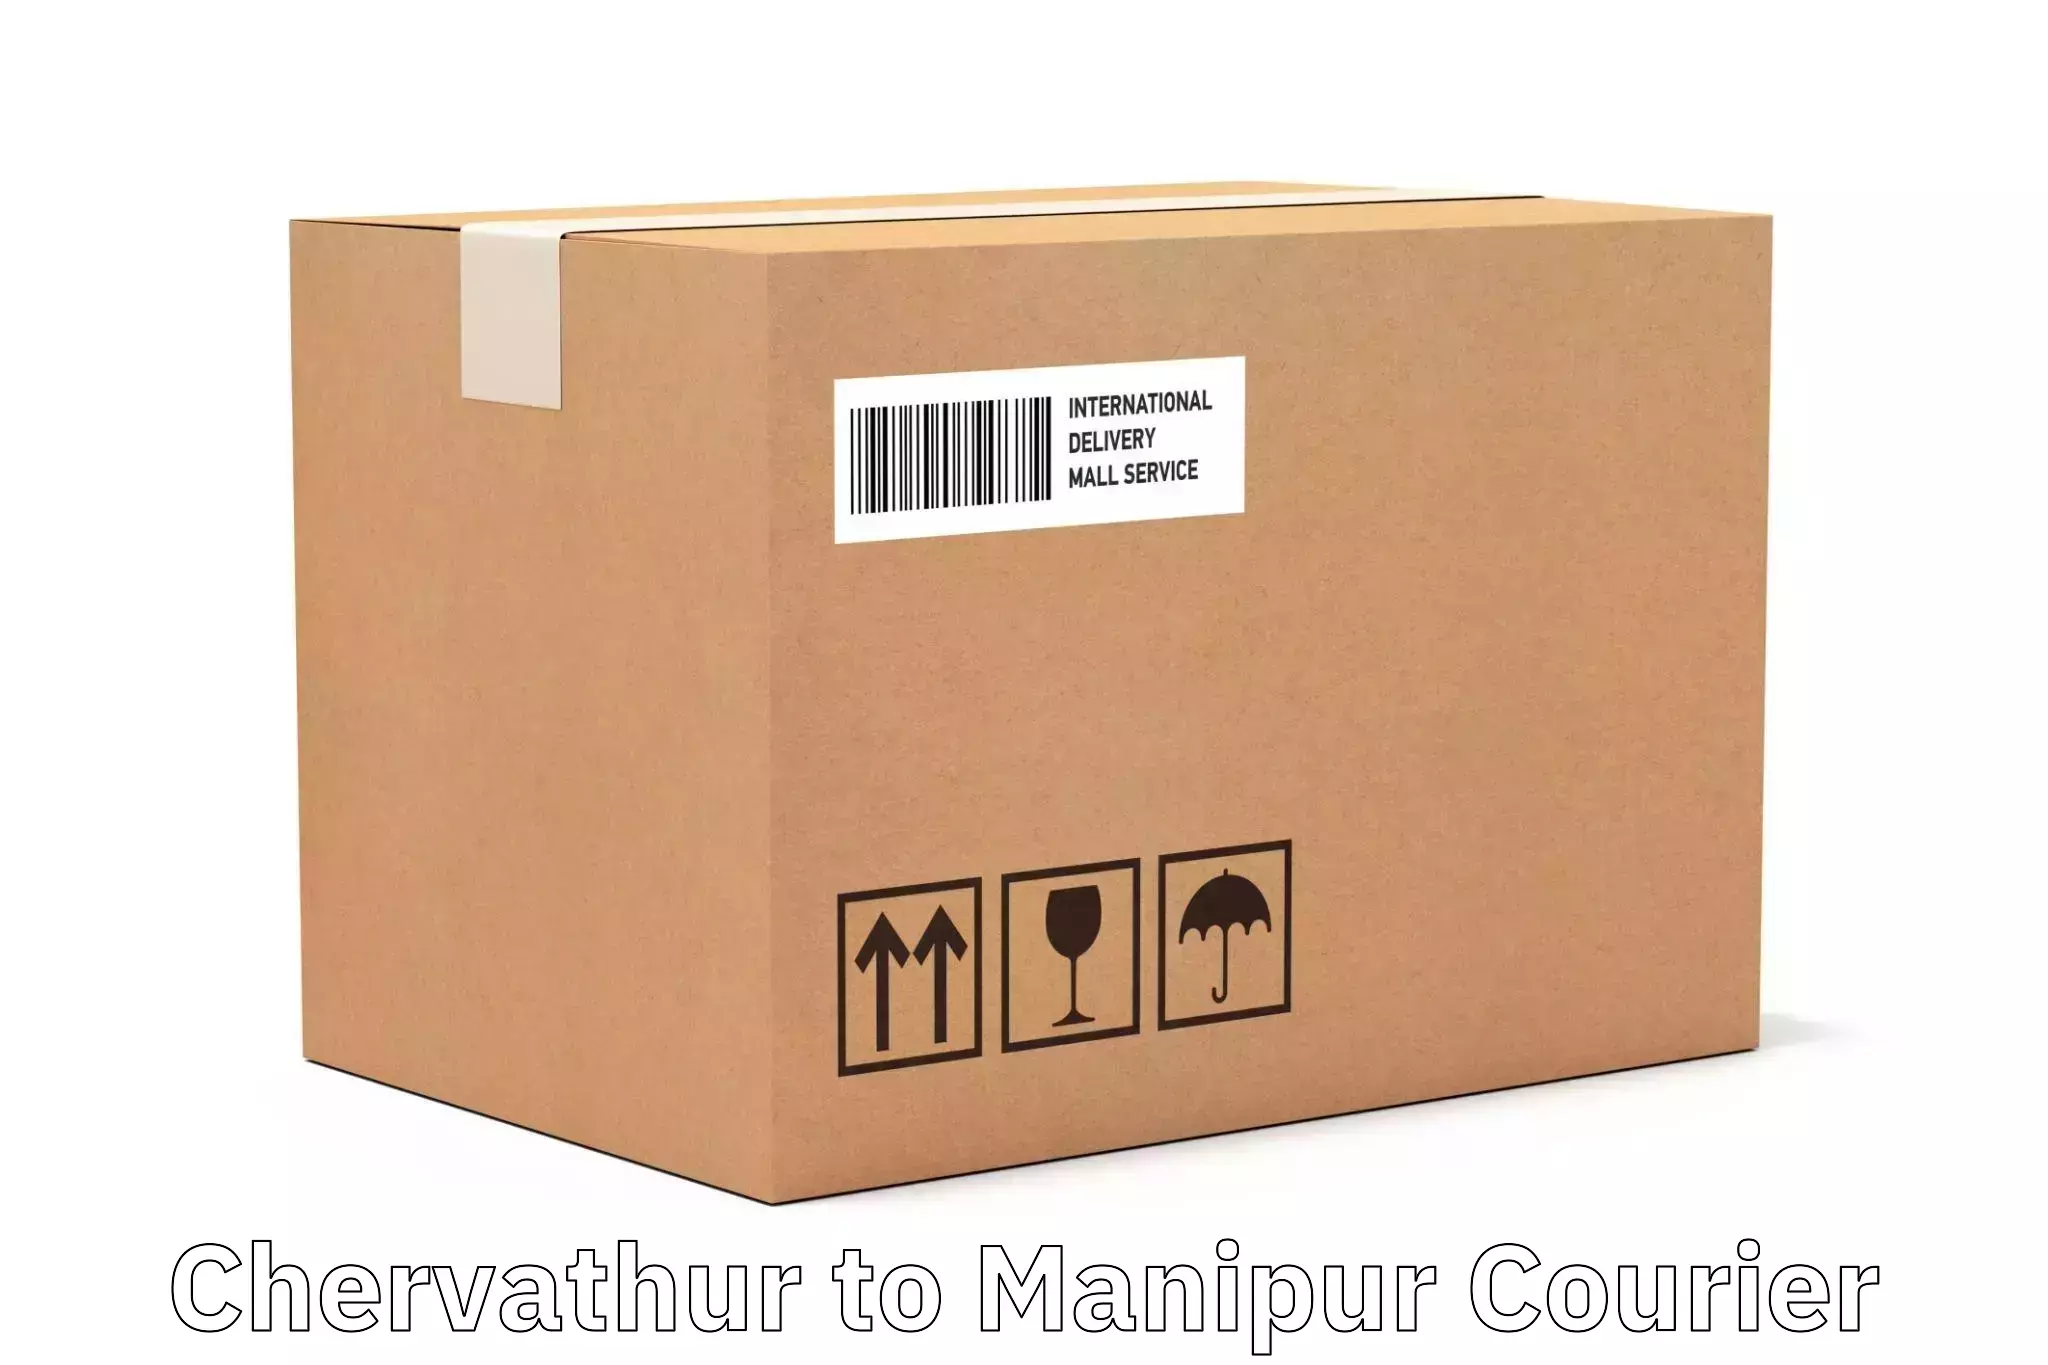 Courier dispatch services in Chervathur to Kanti